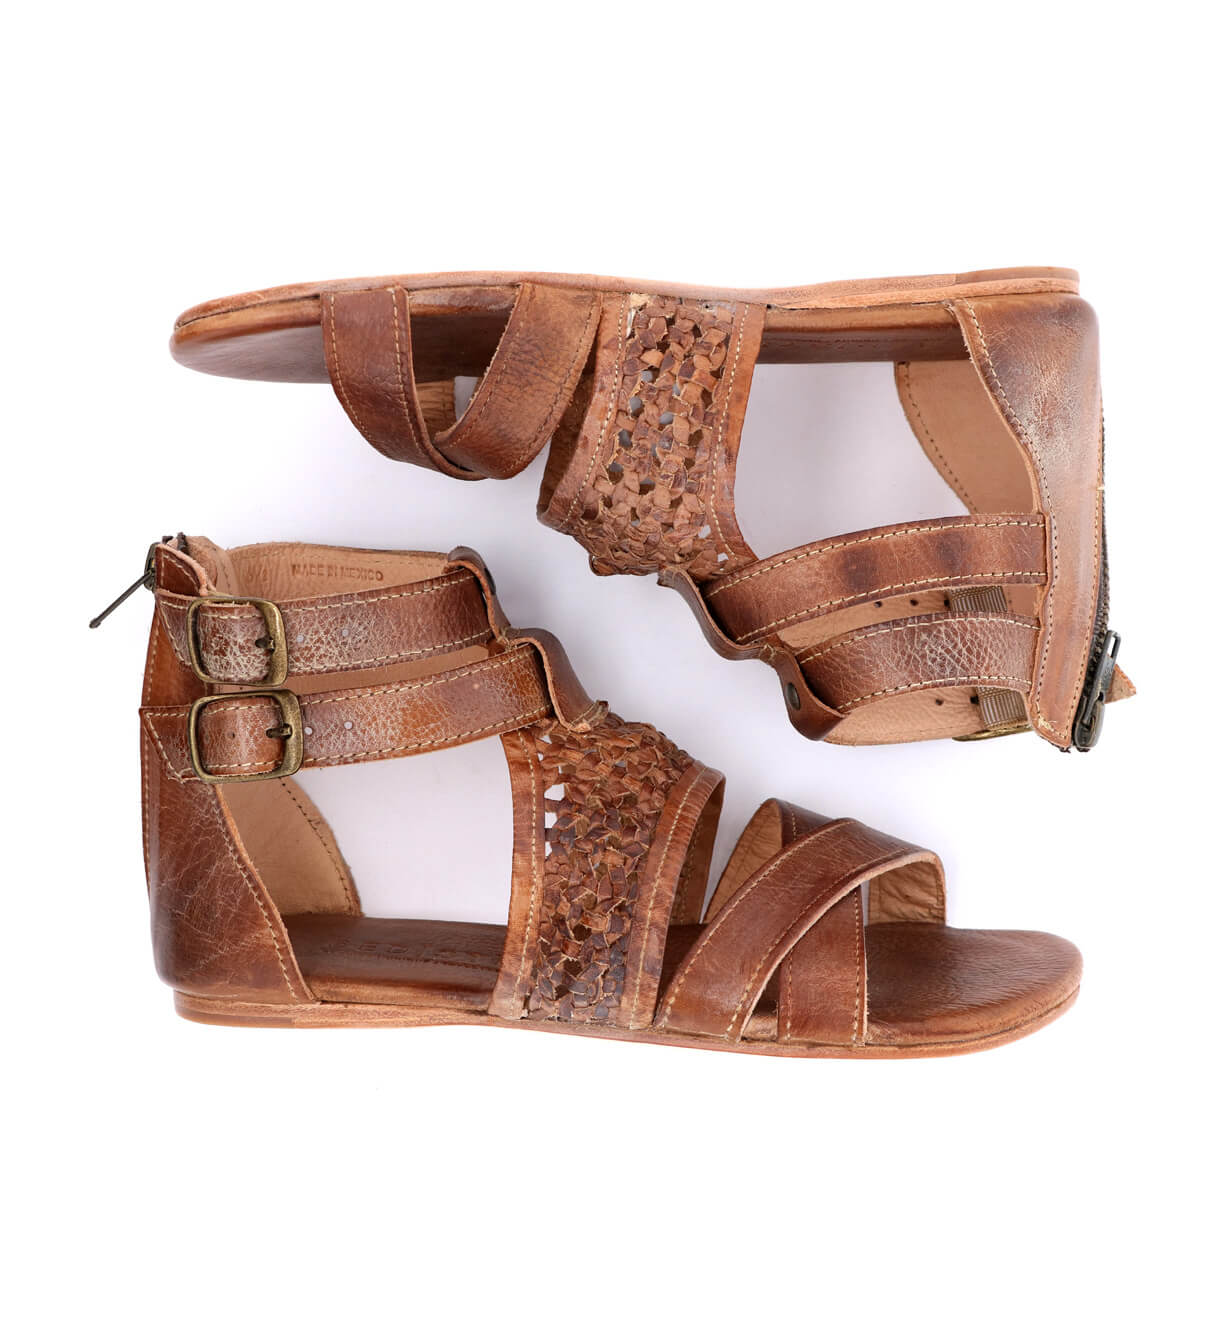 A pair of Capriana women's brown sandals with straps and buckles. Brand: Bed Stu.